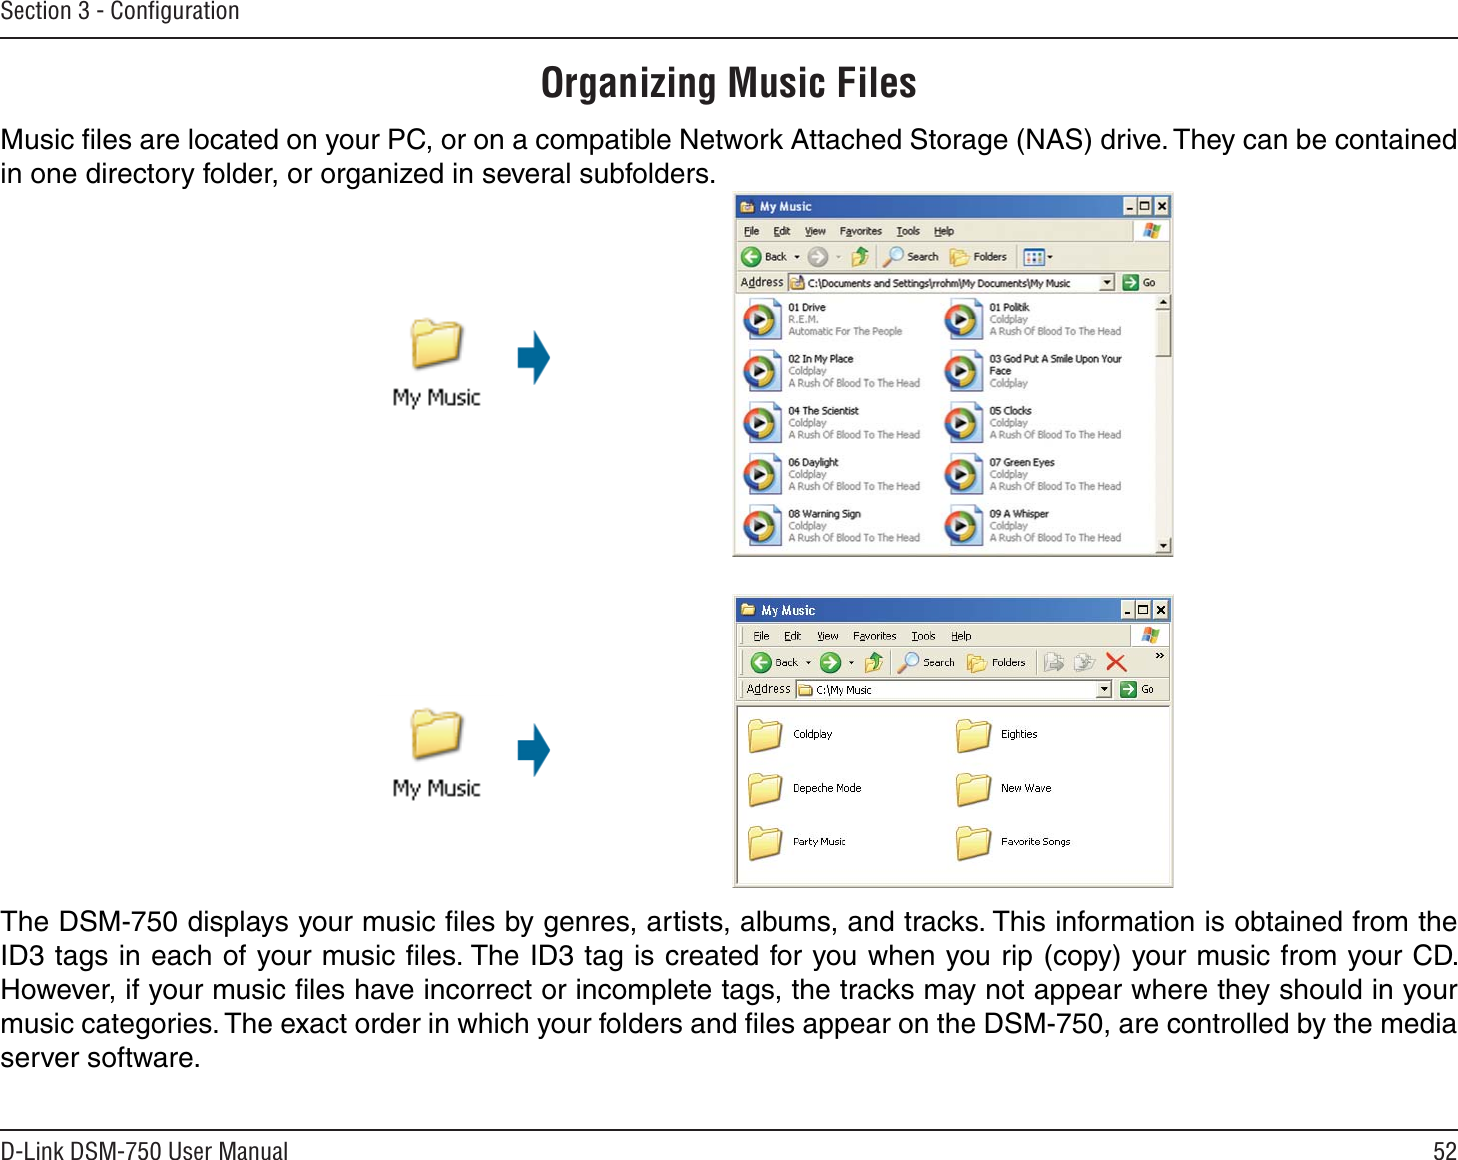 52D-Link DSM-750 User ManualSection 3 - ConﬁgurationOrganizing Music FilesMusic ﬁles are located on your PC, or on a compatible Network Attached Storage (NAS) drive. They can be contained in one directory folder, or organized in several subfolders. The DSM-750 displays your music ﬁles by genres, artists, albums, and tracks. This information is obtained from the ID3 tags in each of your music ﬁles. The ID3 tag is created for you when you rip (copy) your music from your CD. However, if your music ﬁles have incorrect or incomplete tags, the tracks may not appear where they should in your music categories. The exact order in which your folders and ﬁles appear on the DSM-750, are controlled by the media server software.